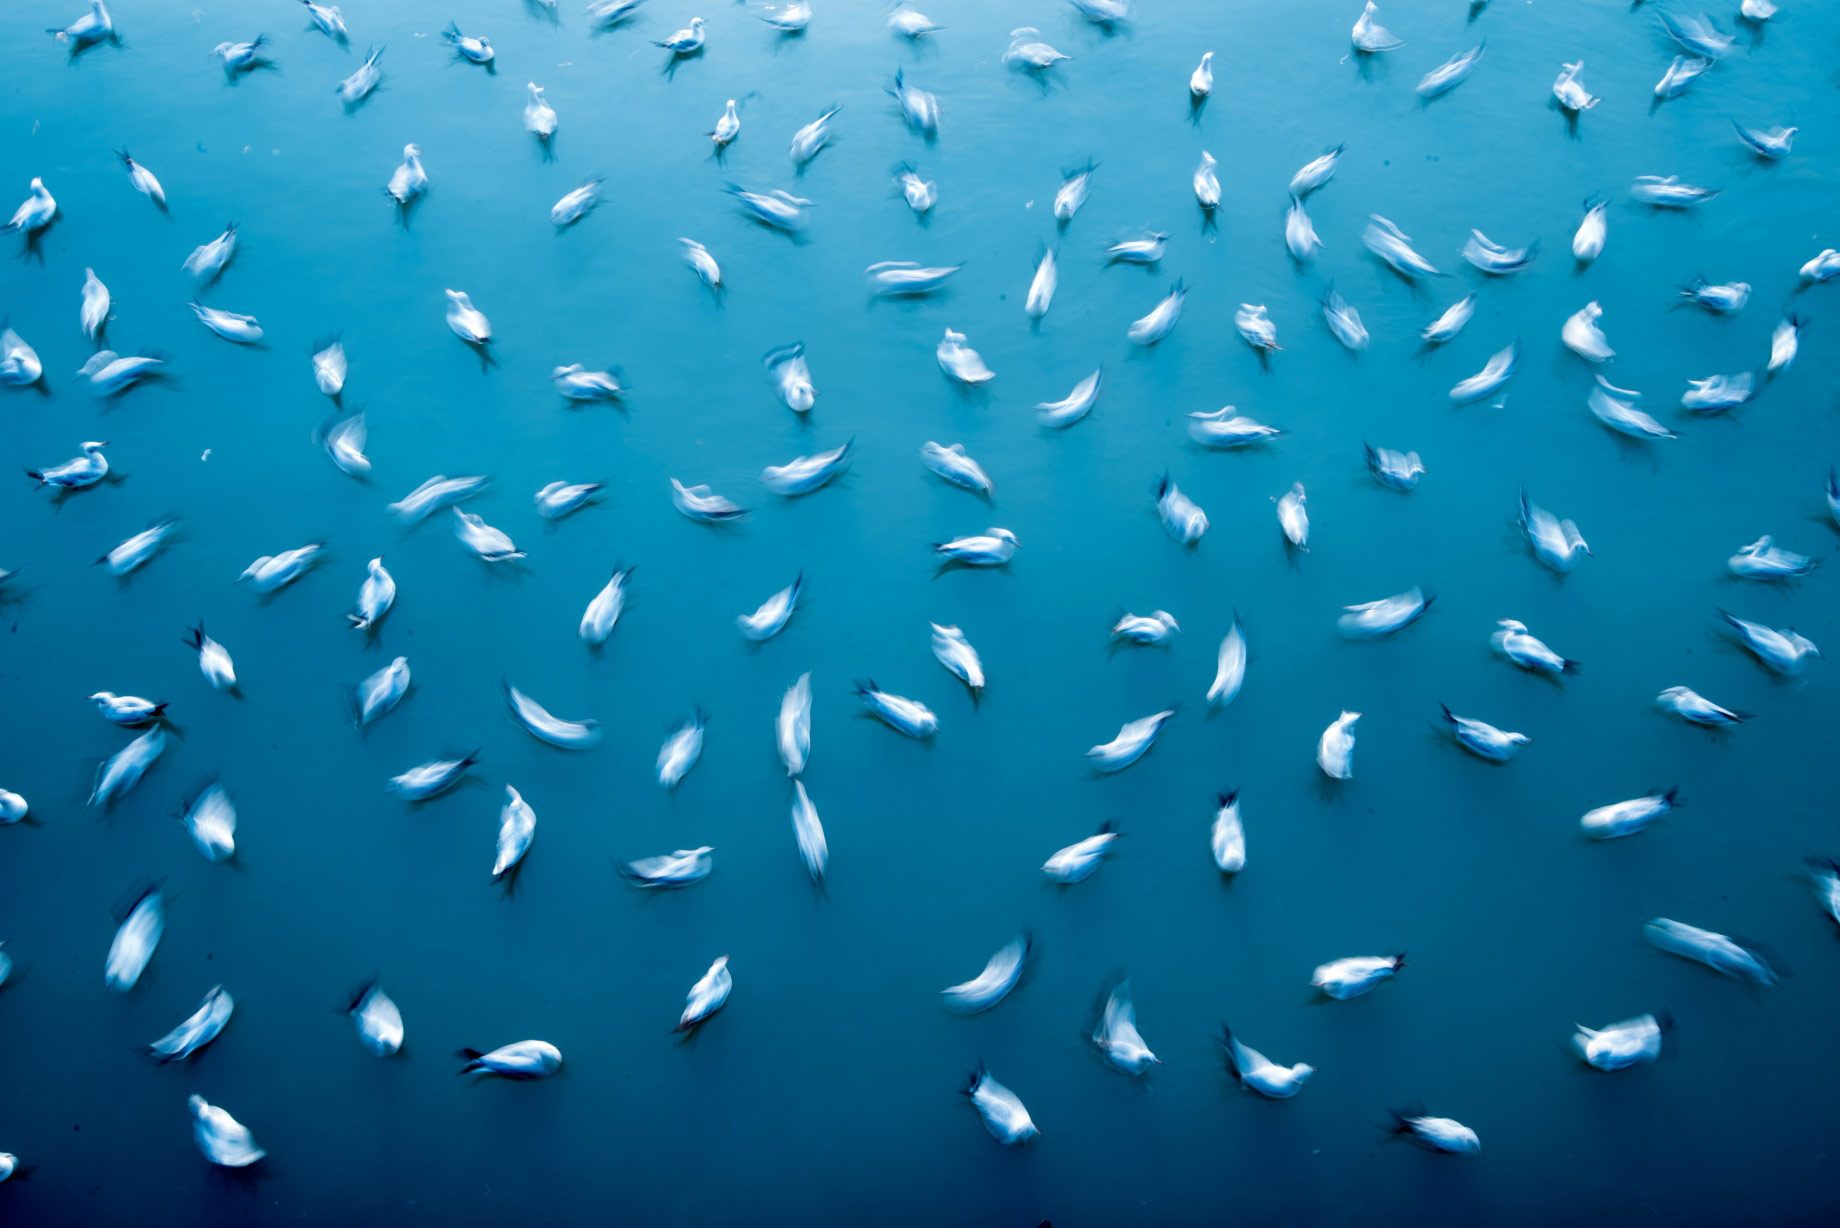 © Viraj Ghaisas, Flock of seagulls, Royal Society of Biology Photography Competition